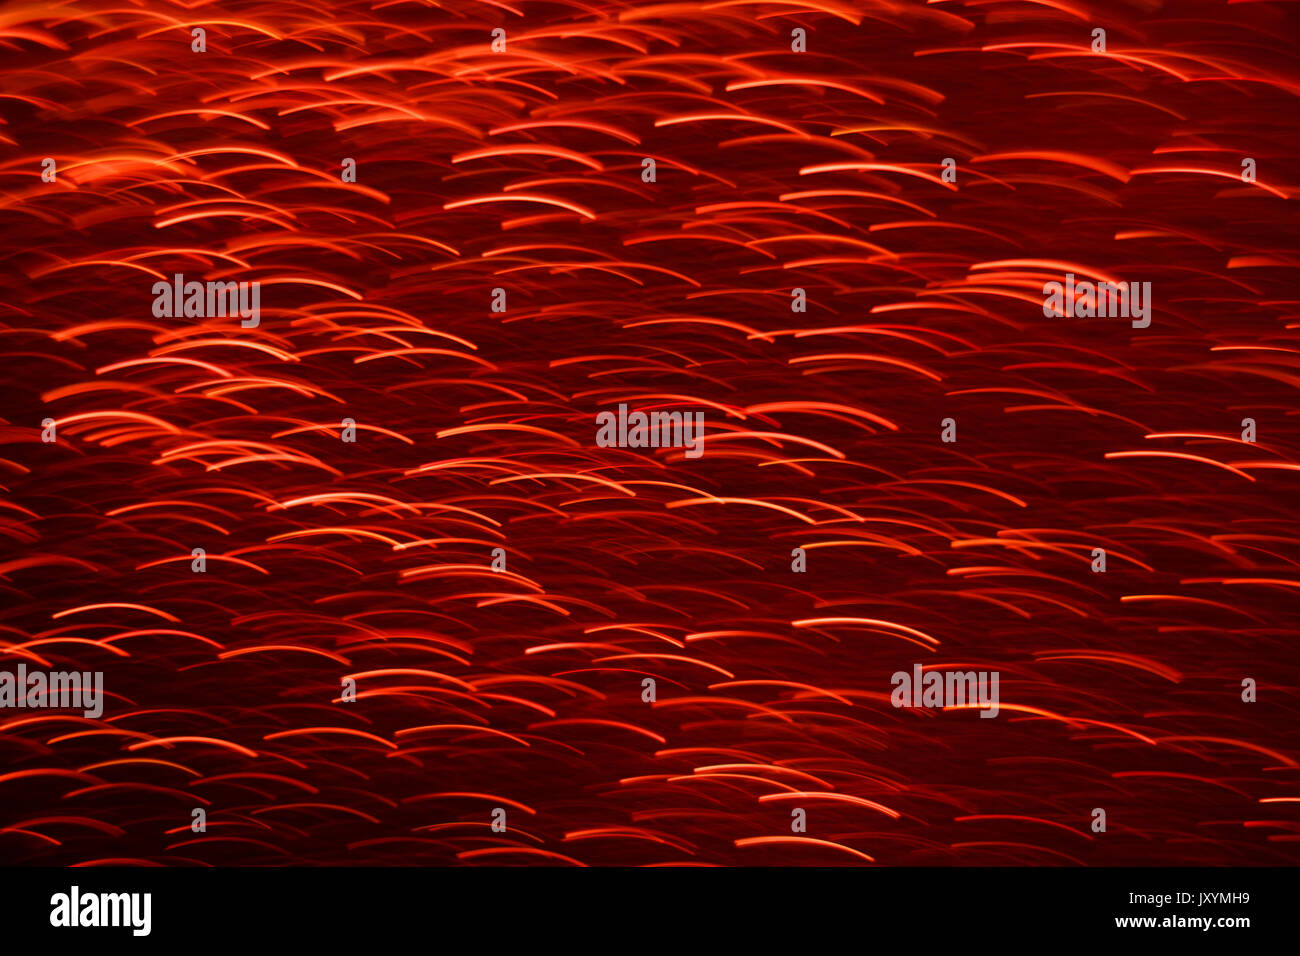 Defocused abstract red lights background with shimmering light Stock Photo